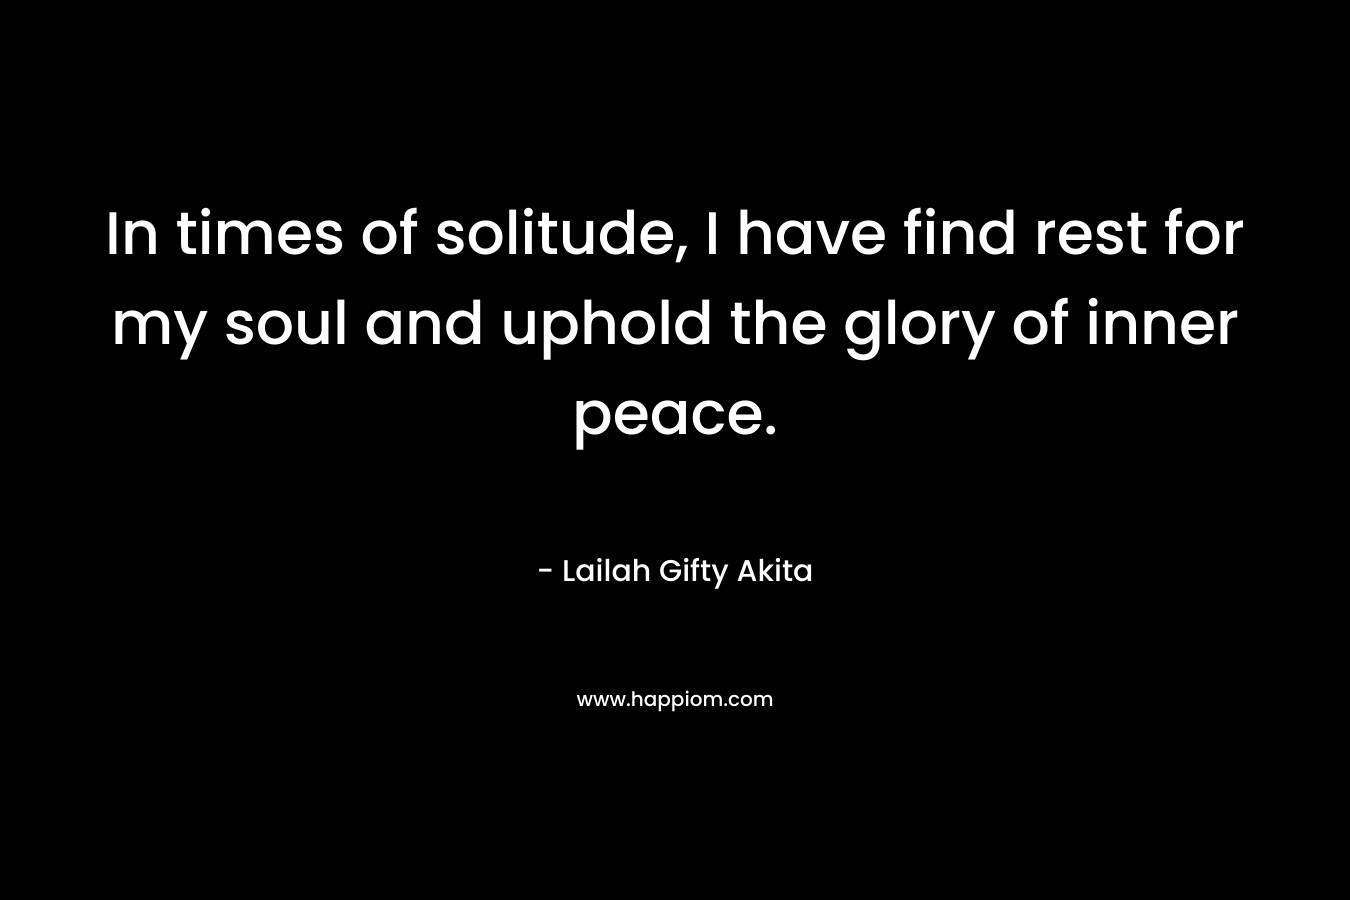 In times of solitude, I have find rest for my soul and uphold the glory of inner peace.